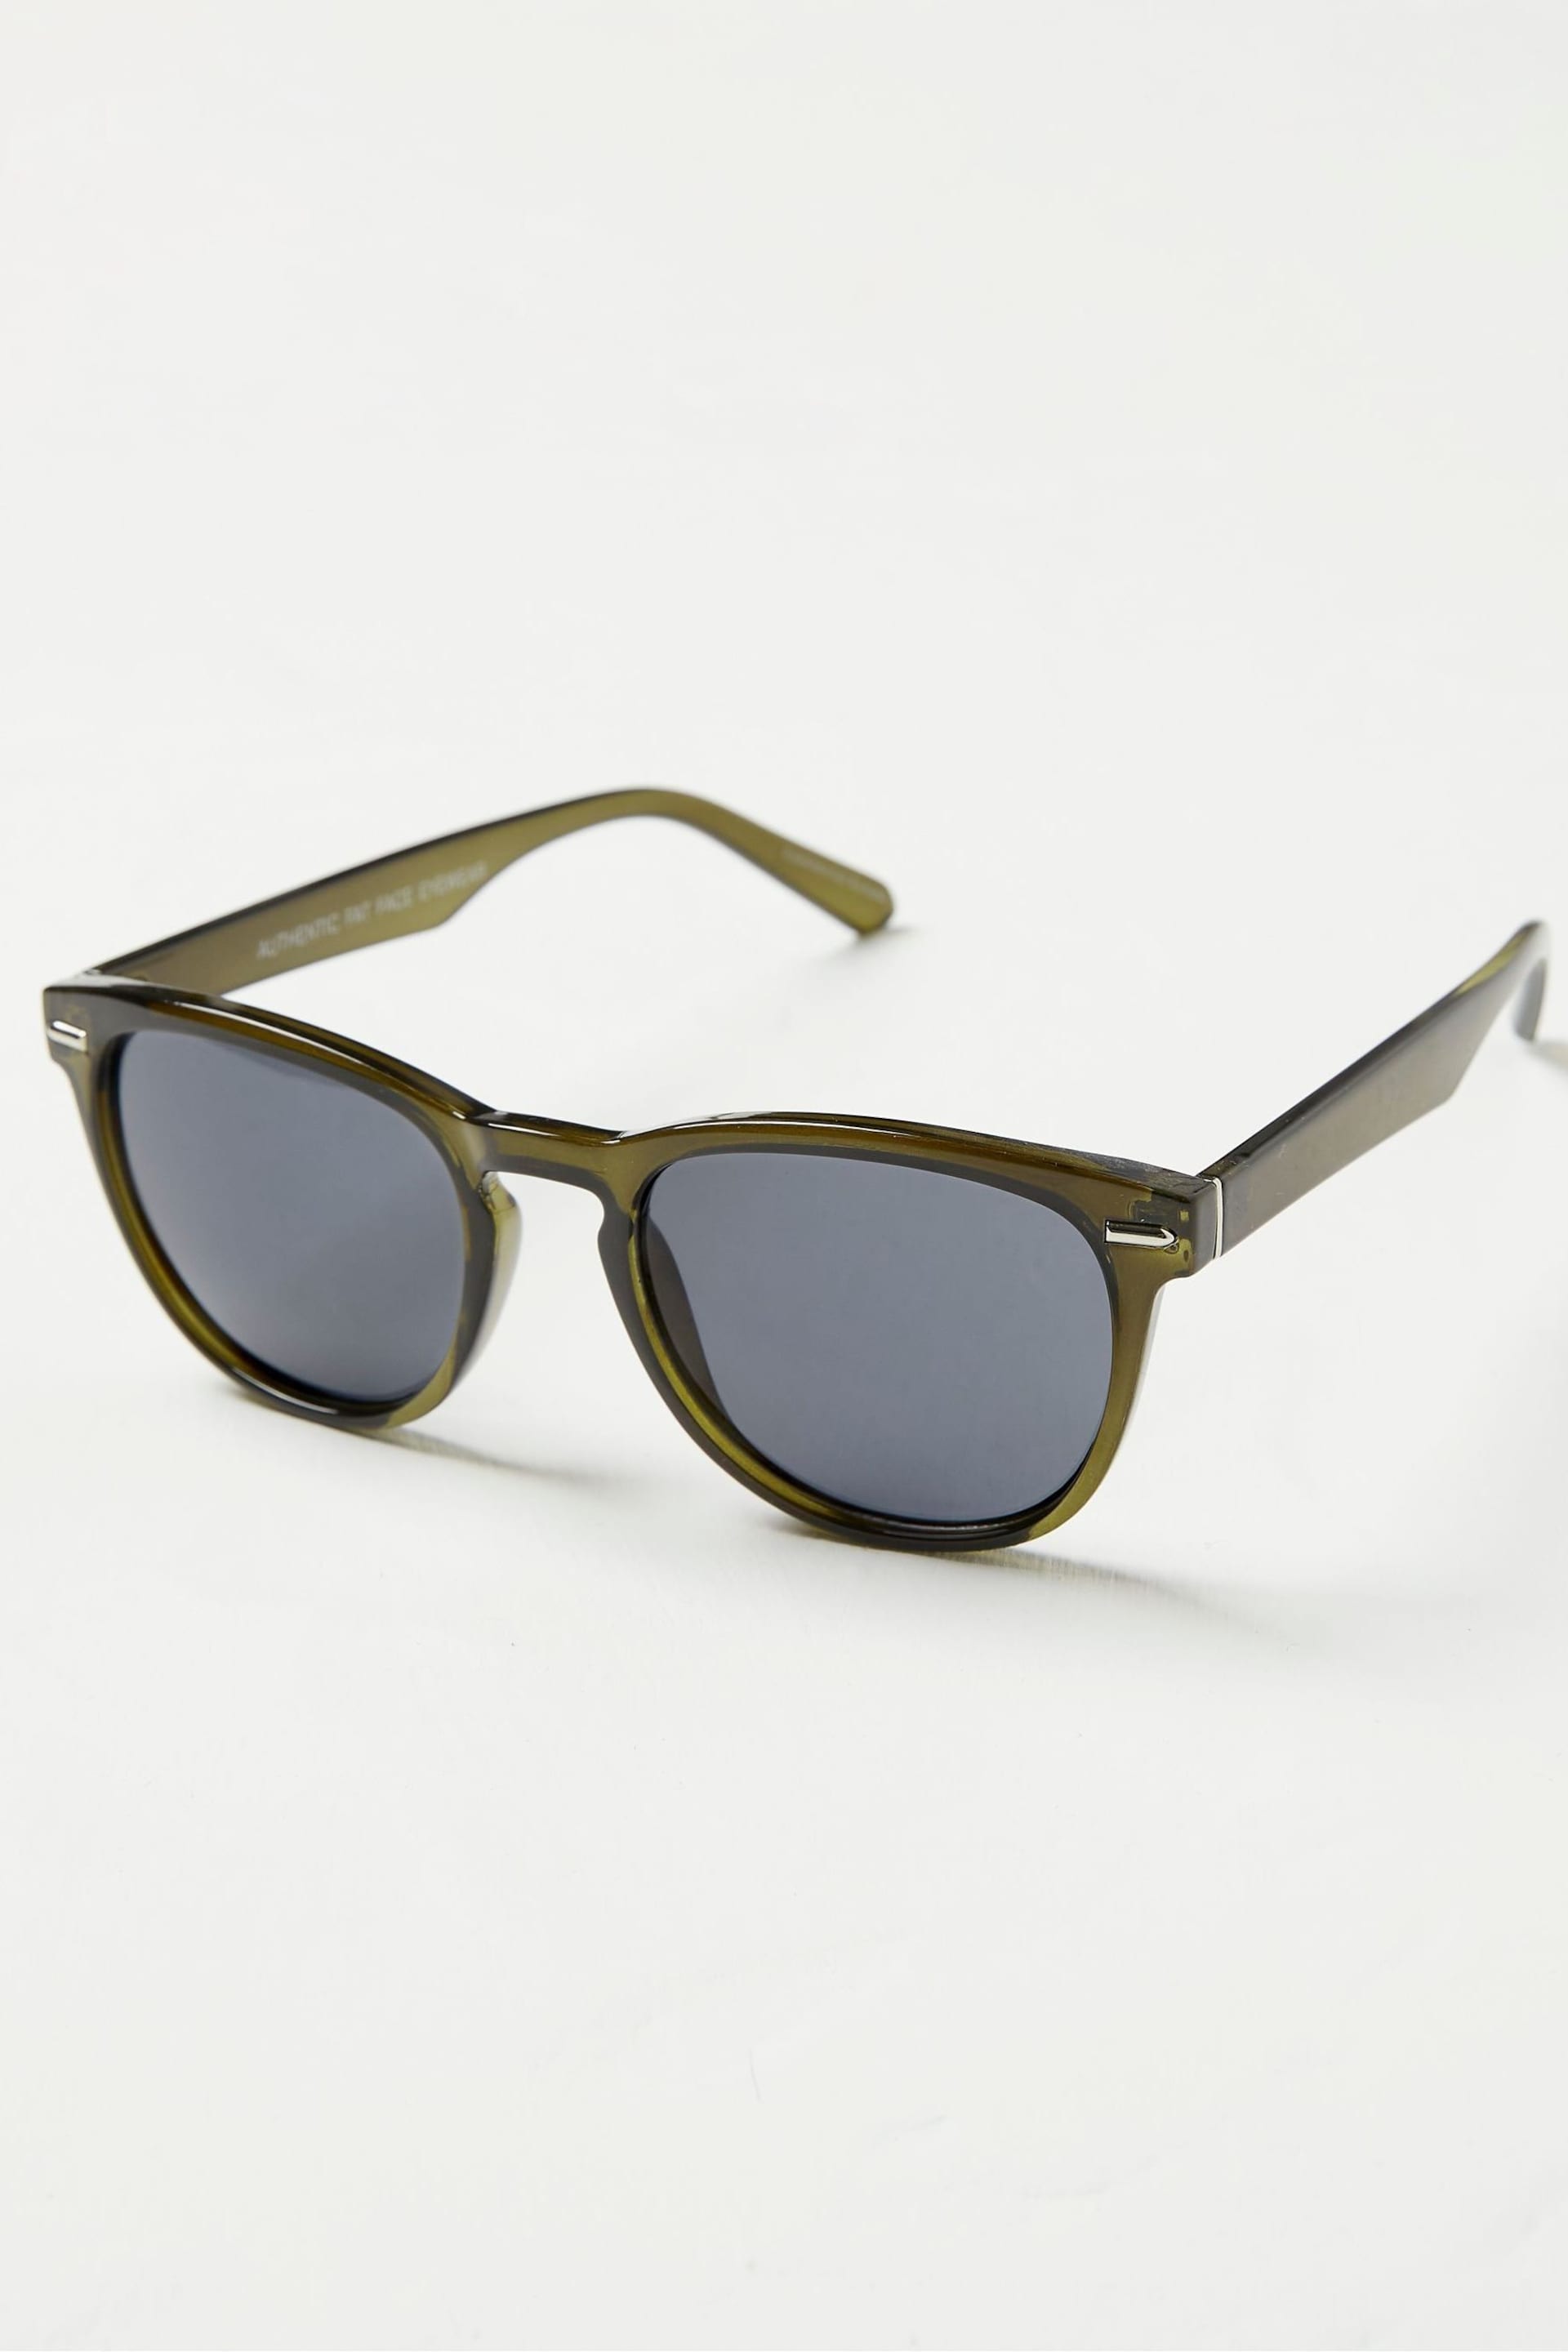 FatFace Green Parker Sunglasses - Image 1 of 2